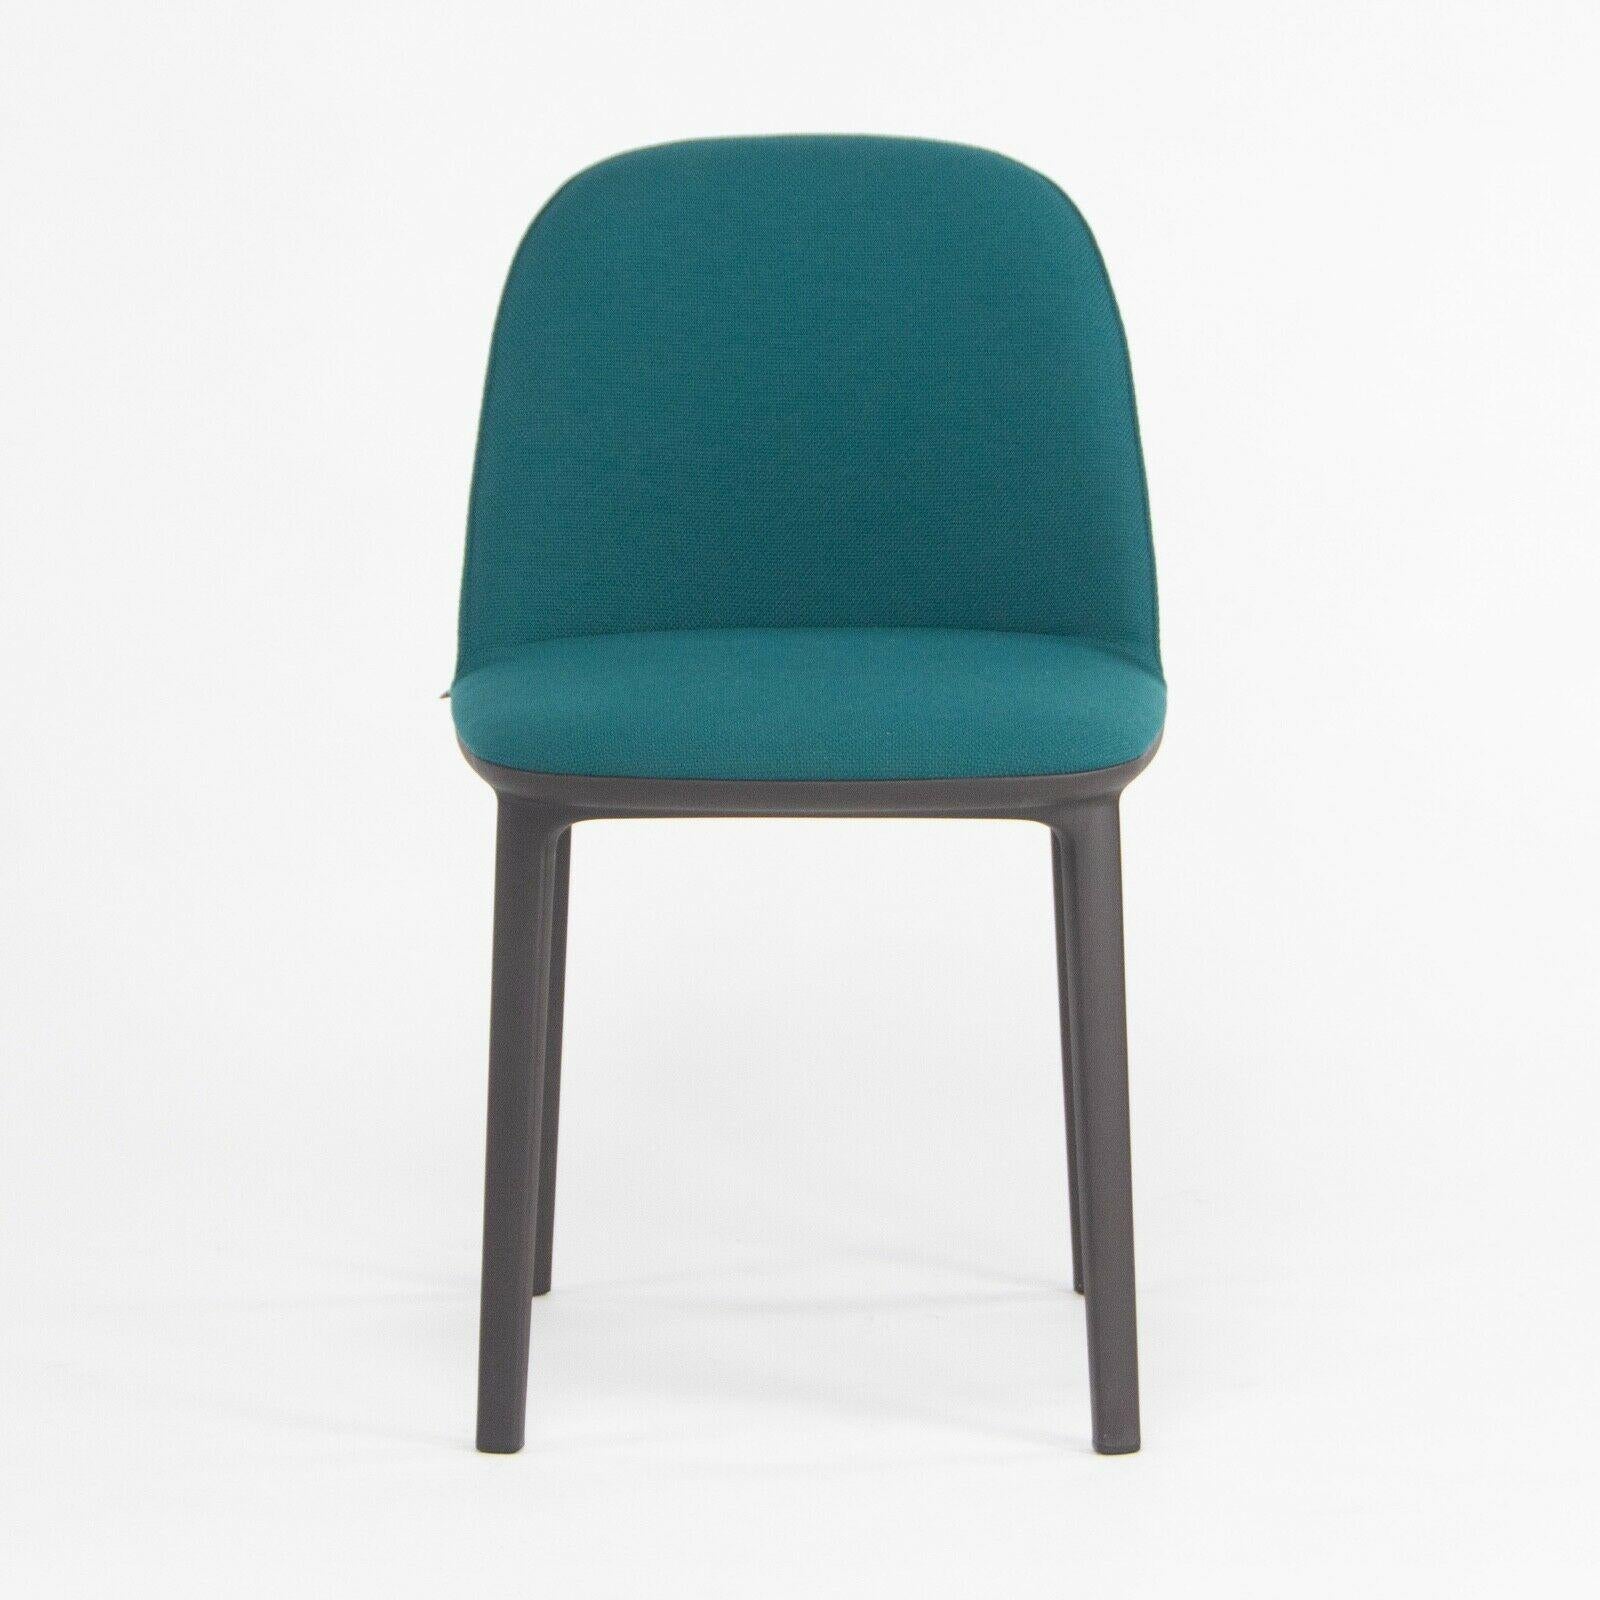 Listed for sale is Softshell Side Chair designed by Ronan and Erwan Bouroullec and produced by Vitra. This chair was constructed with a chocolate colored (very dark) plastic base and seat upholstered with teal blue/green fabric. The condition is